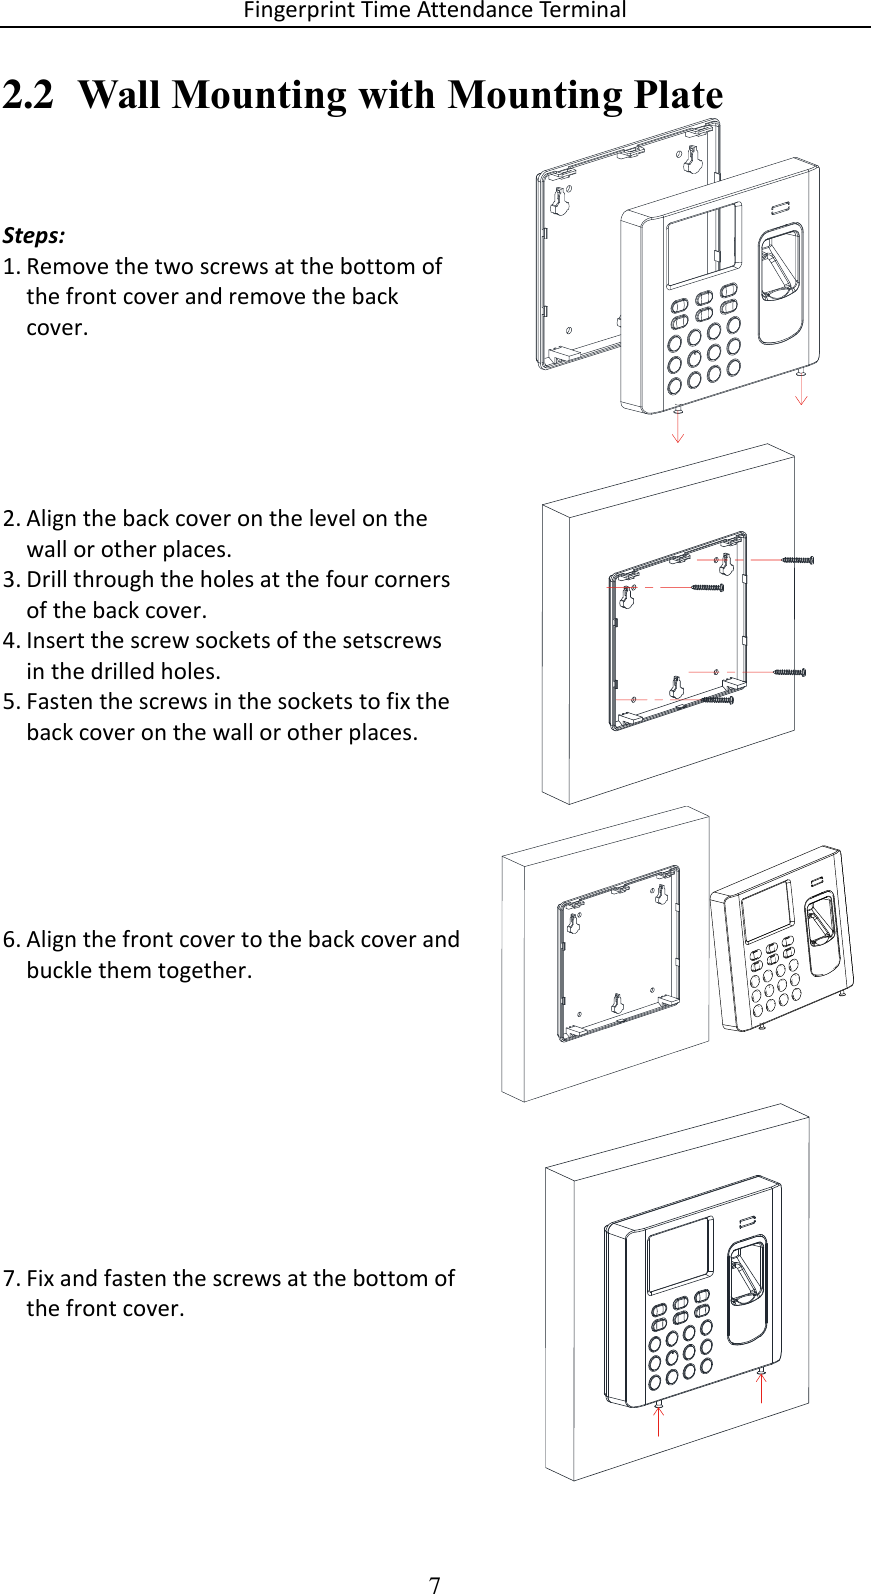 Fingerprint Time Attendance Terminal 7 2.2 Wall Mounting with Mounting Plate Steps: 1. Remove the two screws at the bottom of the front cover and remove the back cover.  2. Align the back cover on the level on the wall or other places. 3. Drill through the holes at the four corners of the back cover. 4. Insert the screw sockets of the setscrews in the drilled holes. 5. Fasten the screws in the sockets to fix the back cover on the wall or other places.  6. Align the front cover to the back cover and buckle them together.  7. Fix and fasten the screws at the bottom of the front cover.     